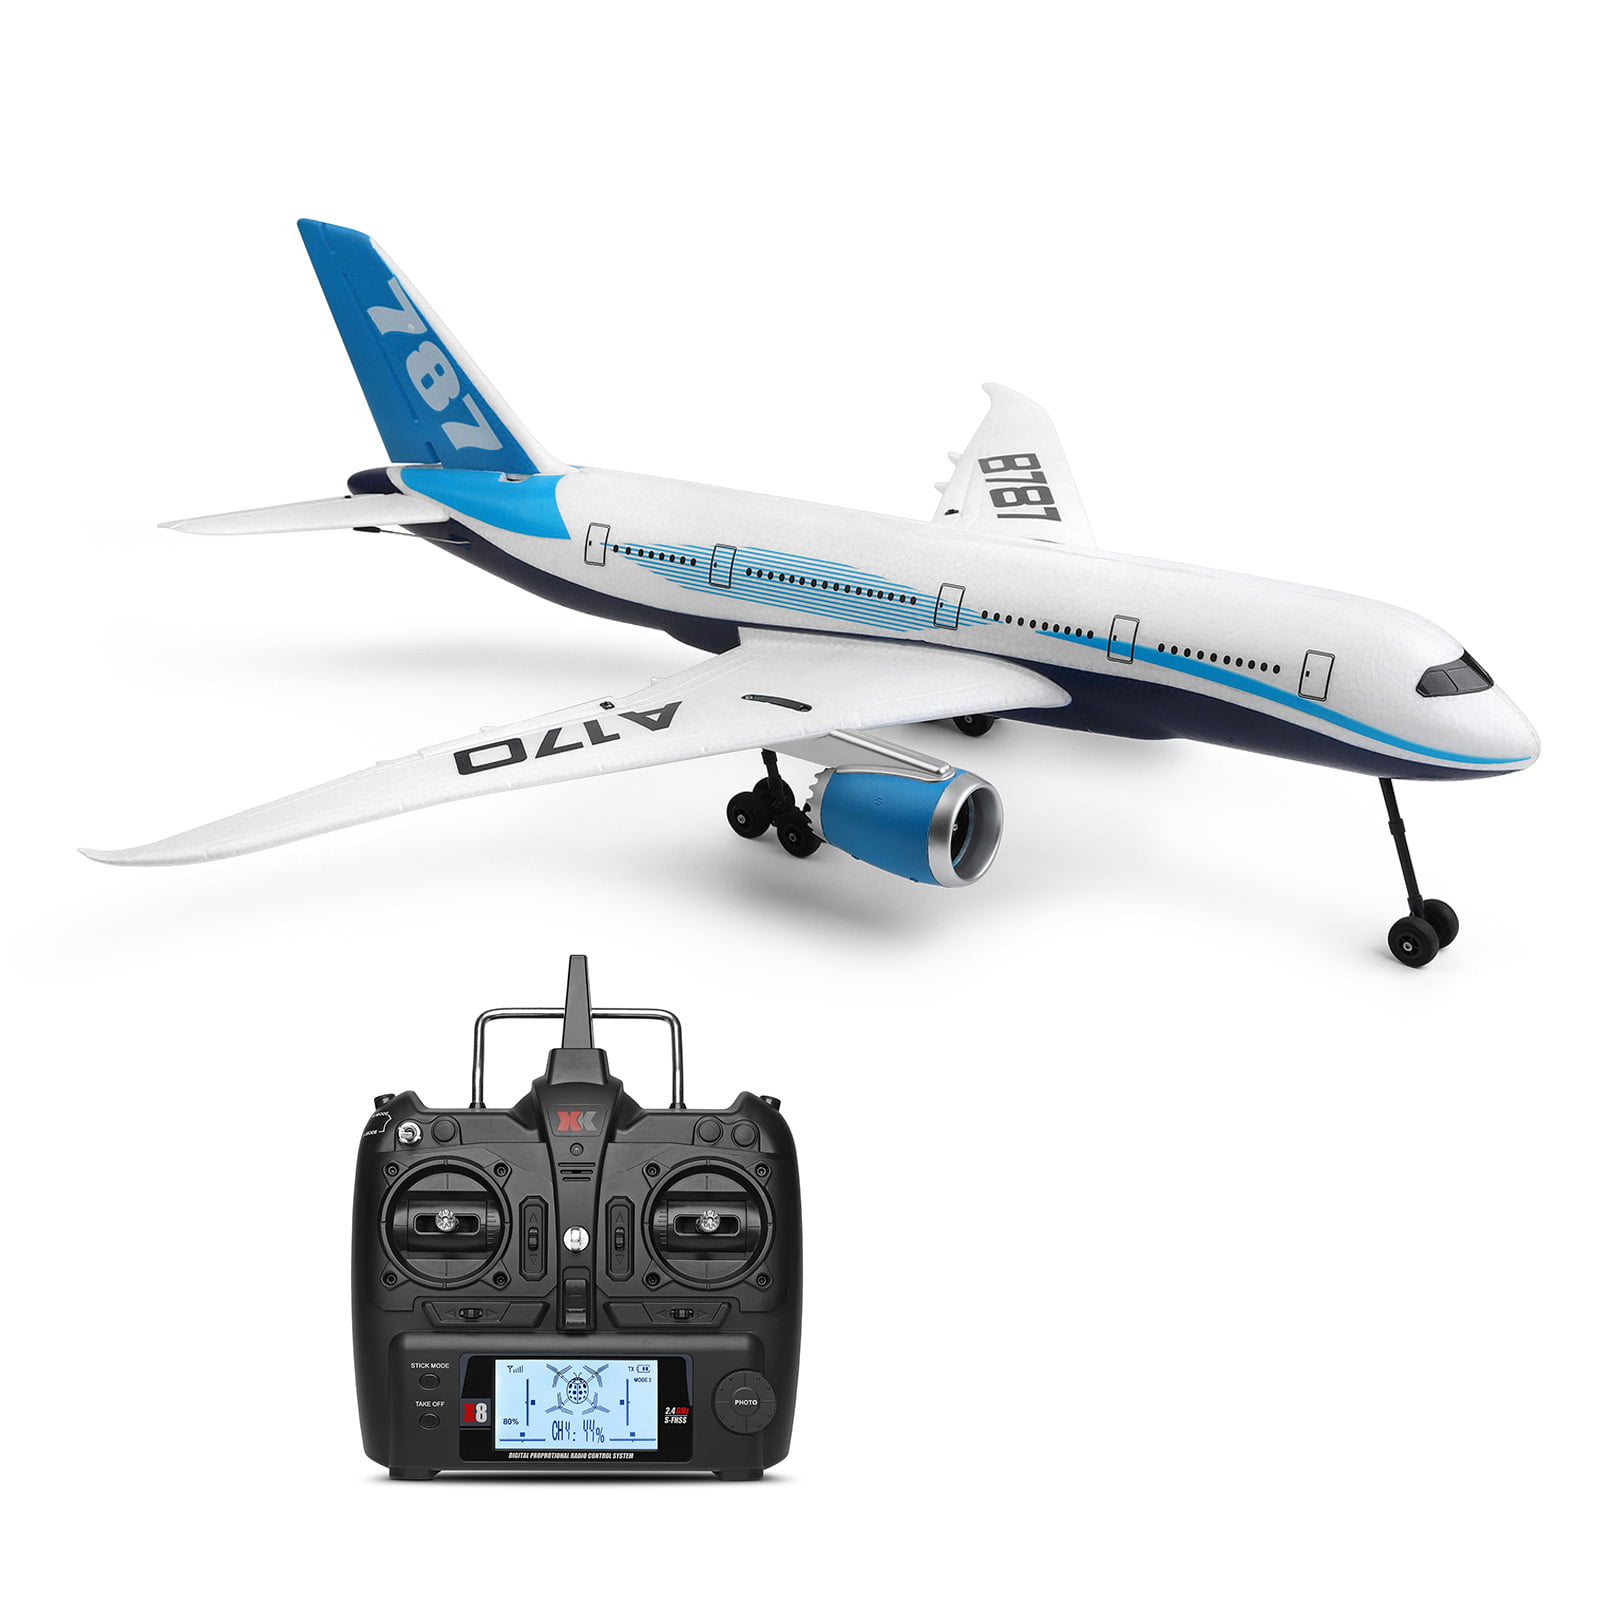 WLtoys 3CH Remote Control Airplane Toy RC Plane Ready To Fly Aircraft Model US 